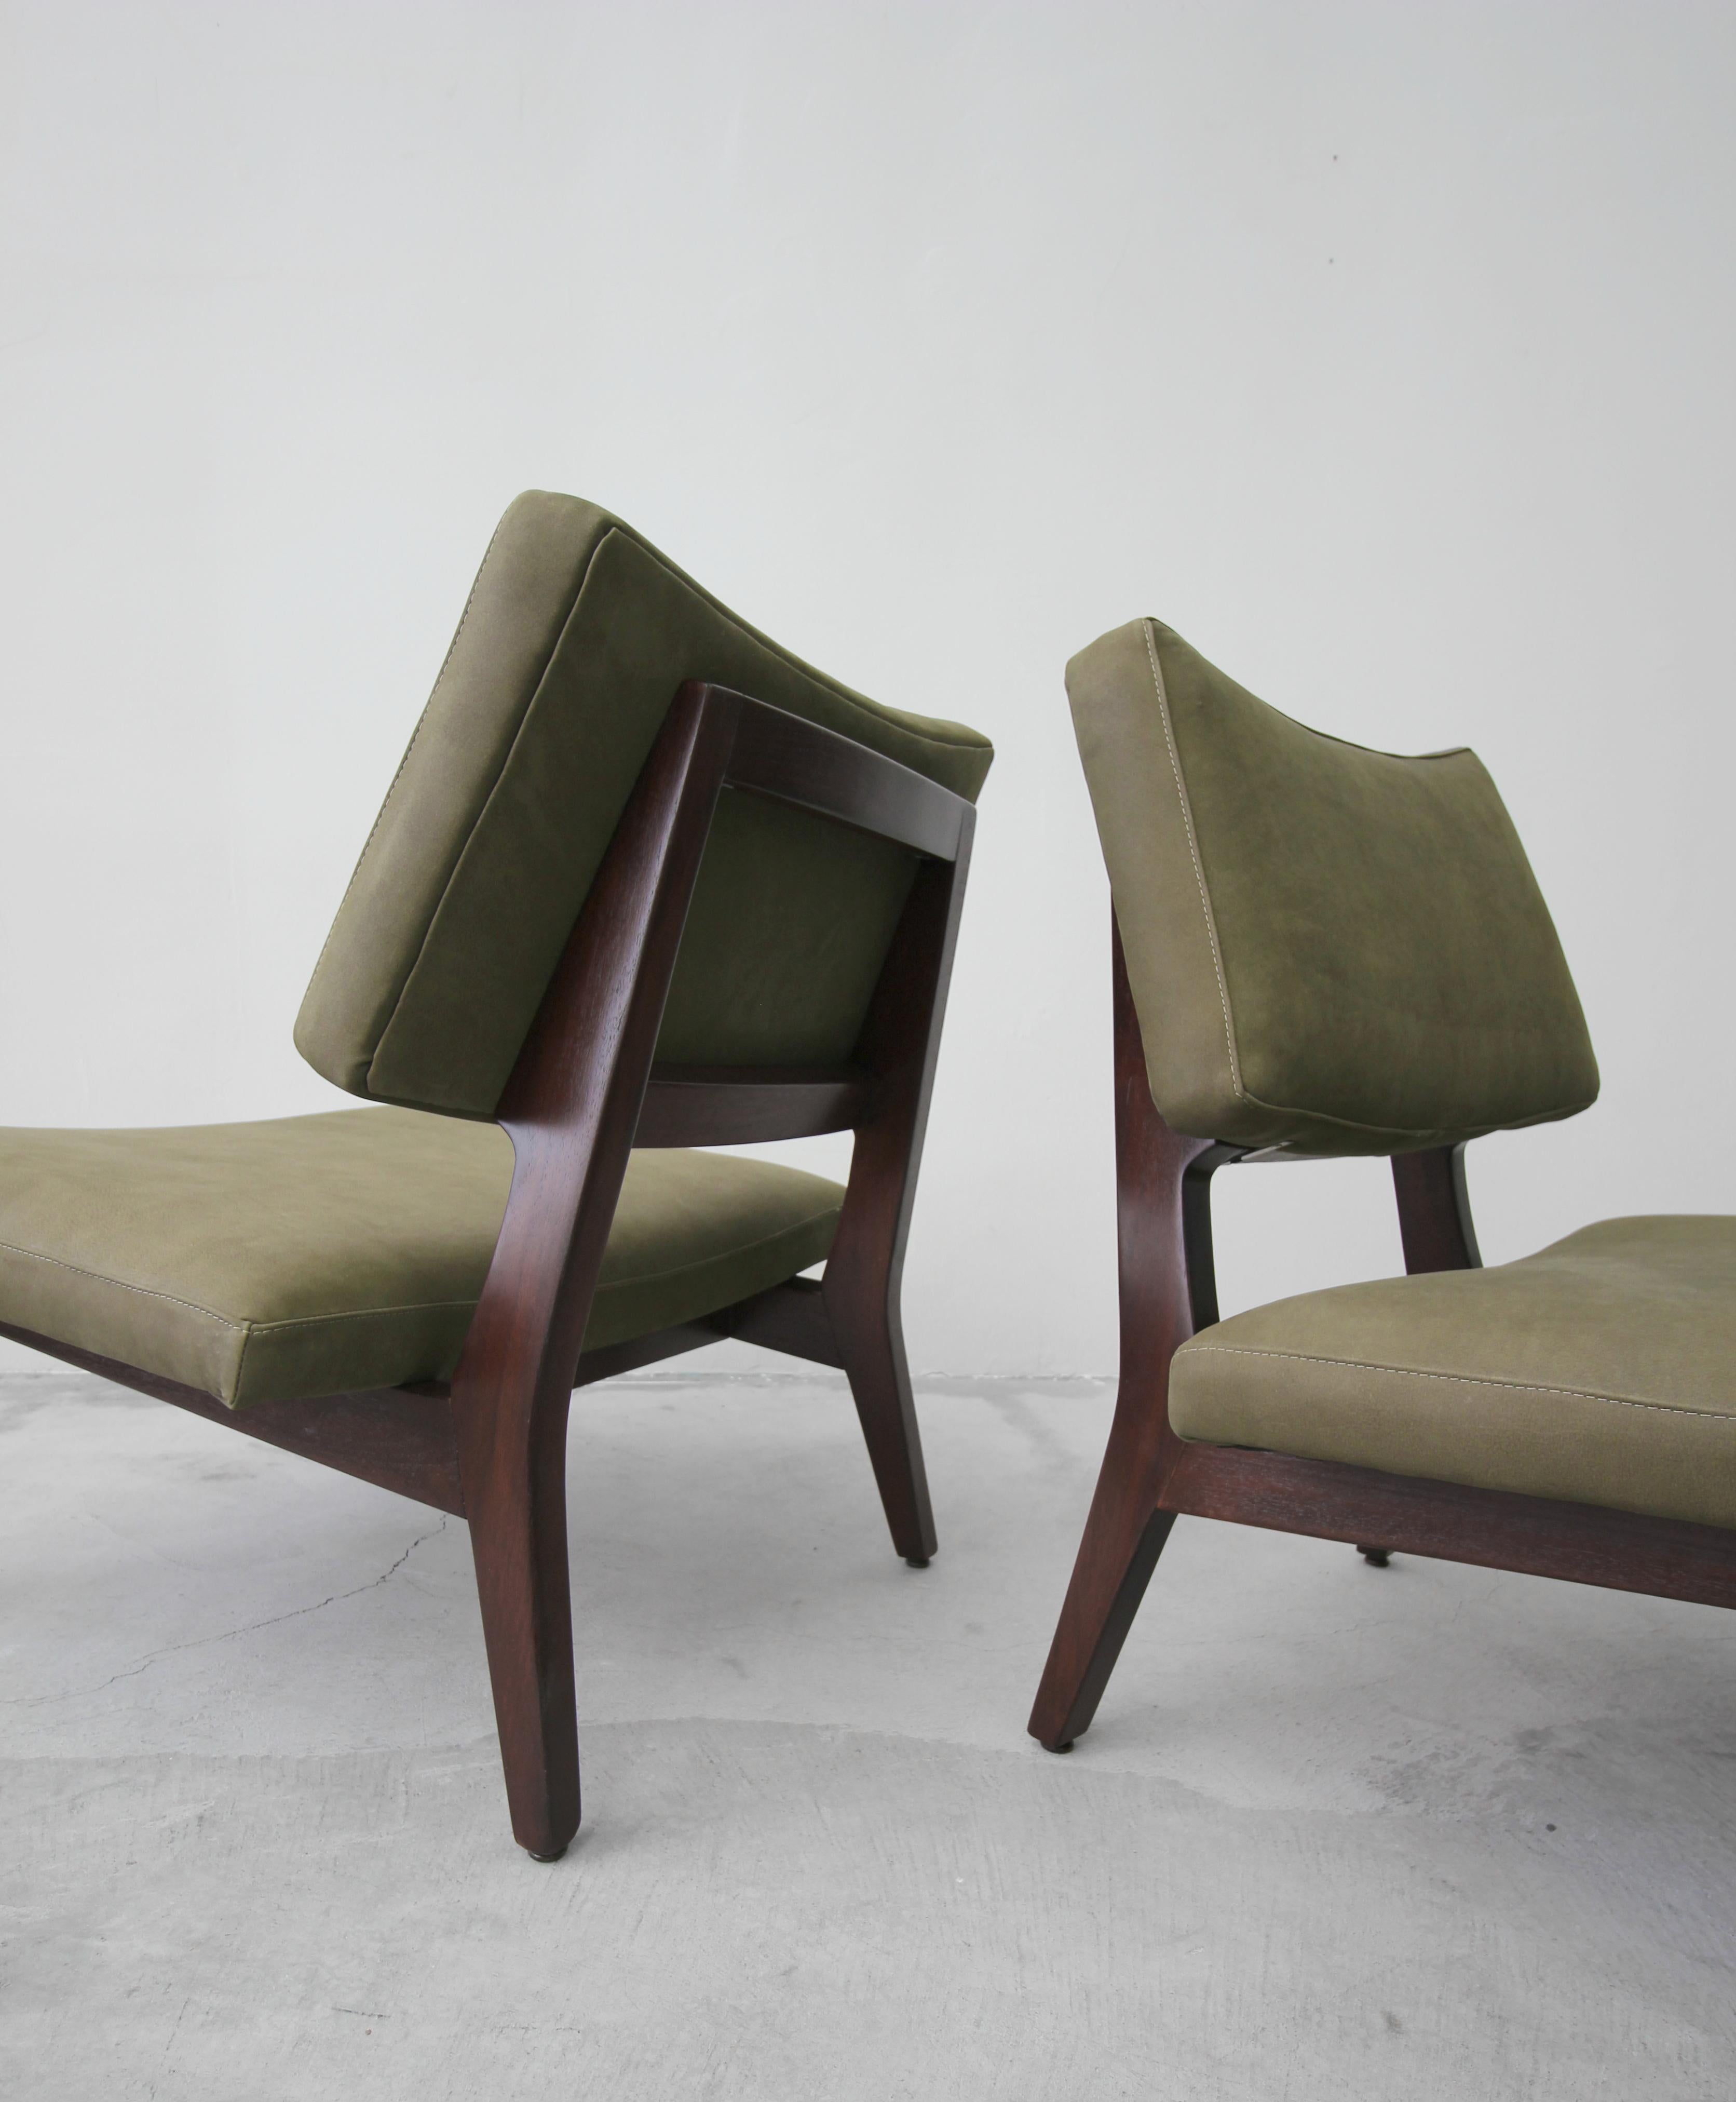 20th Century Pair of Midcentury Walnut and Leather Slipper Lounge Chairs by Jens Risom